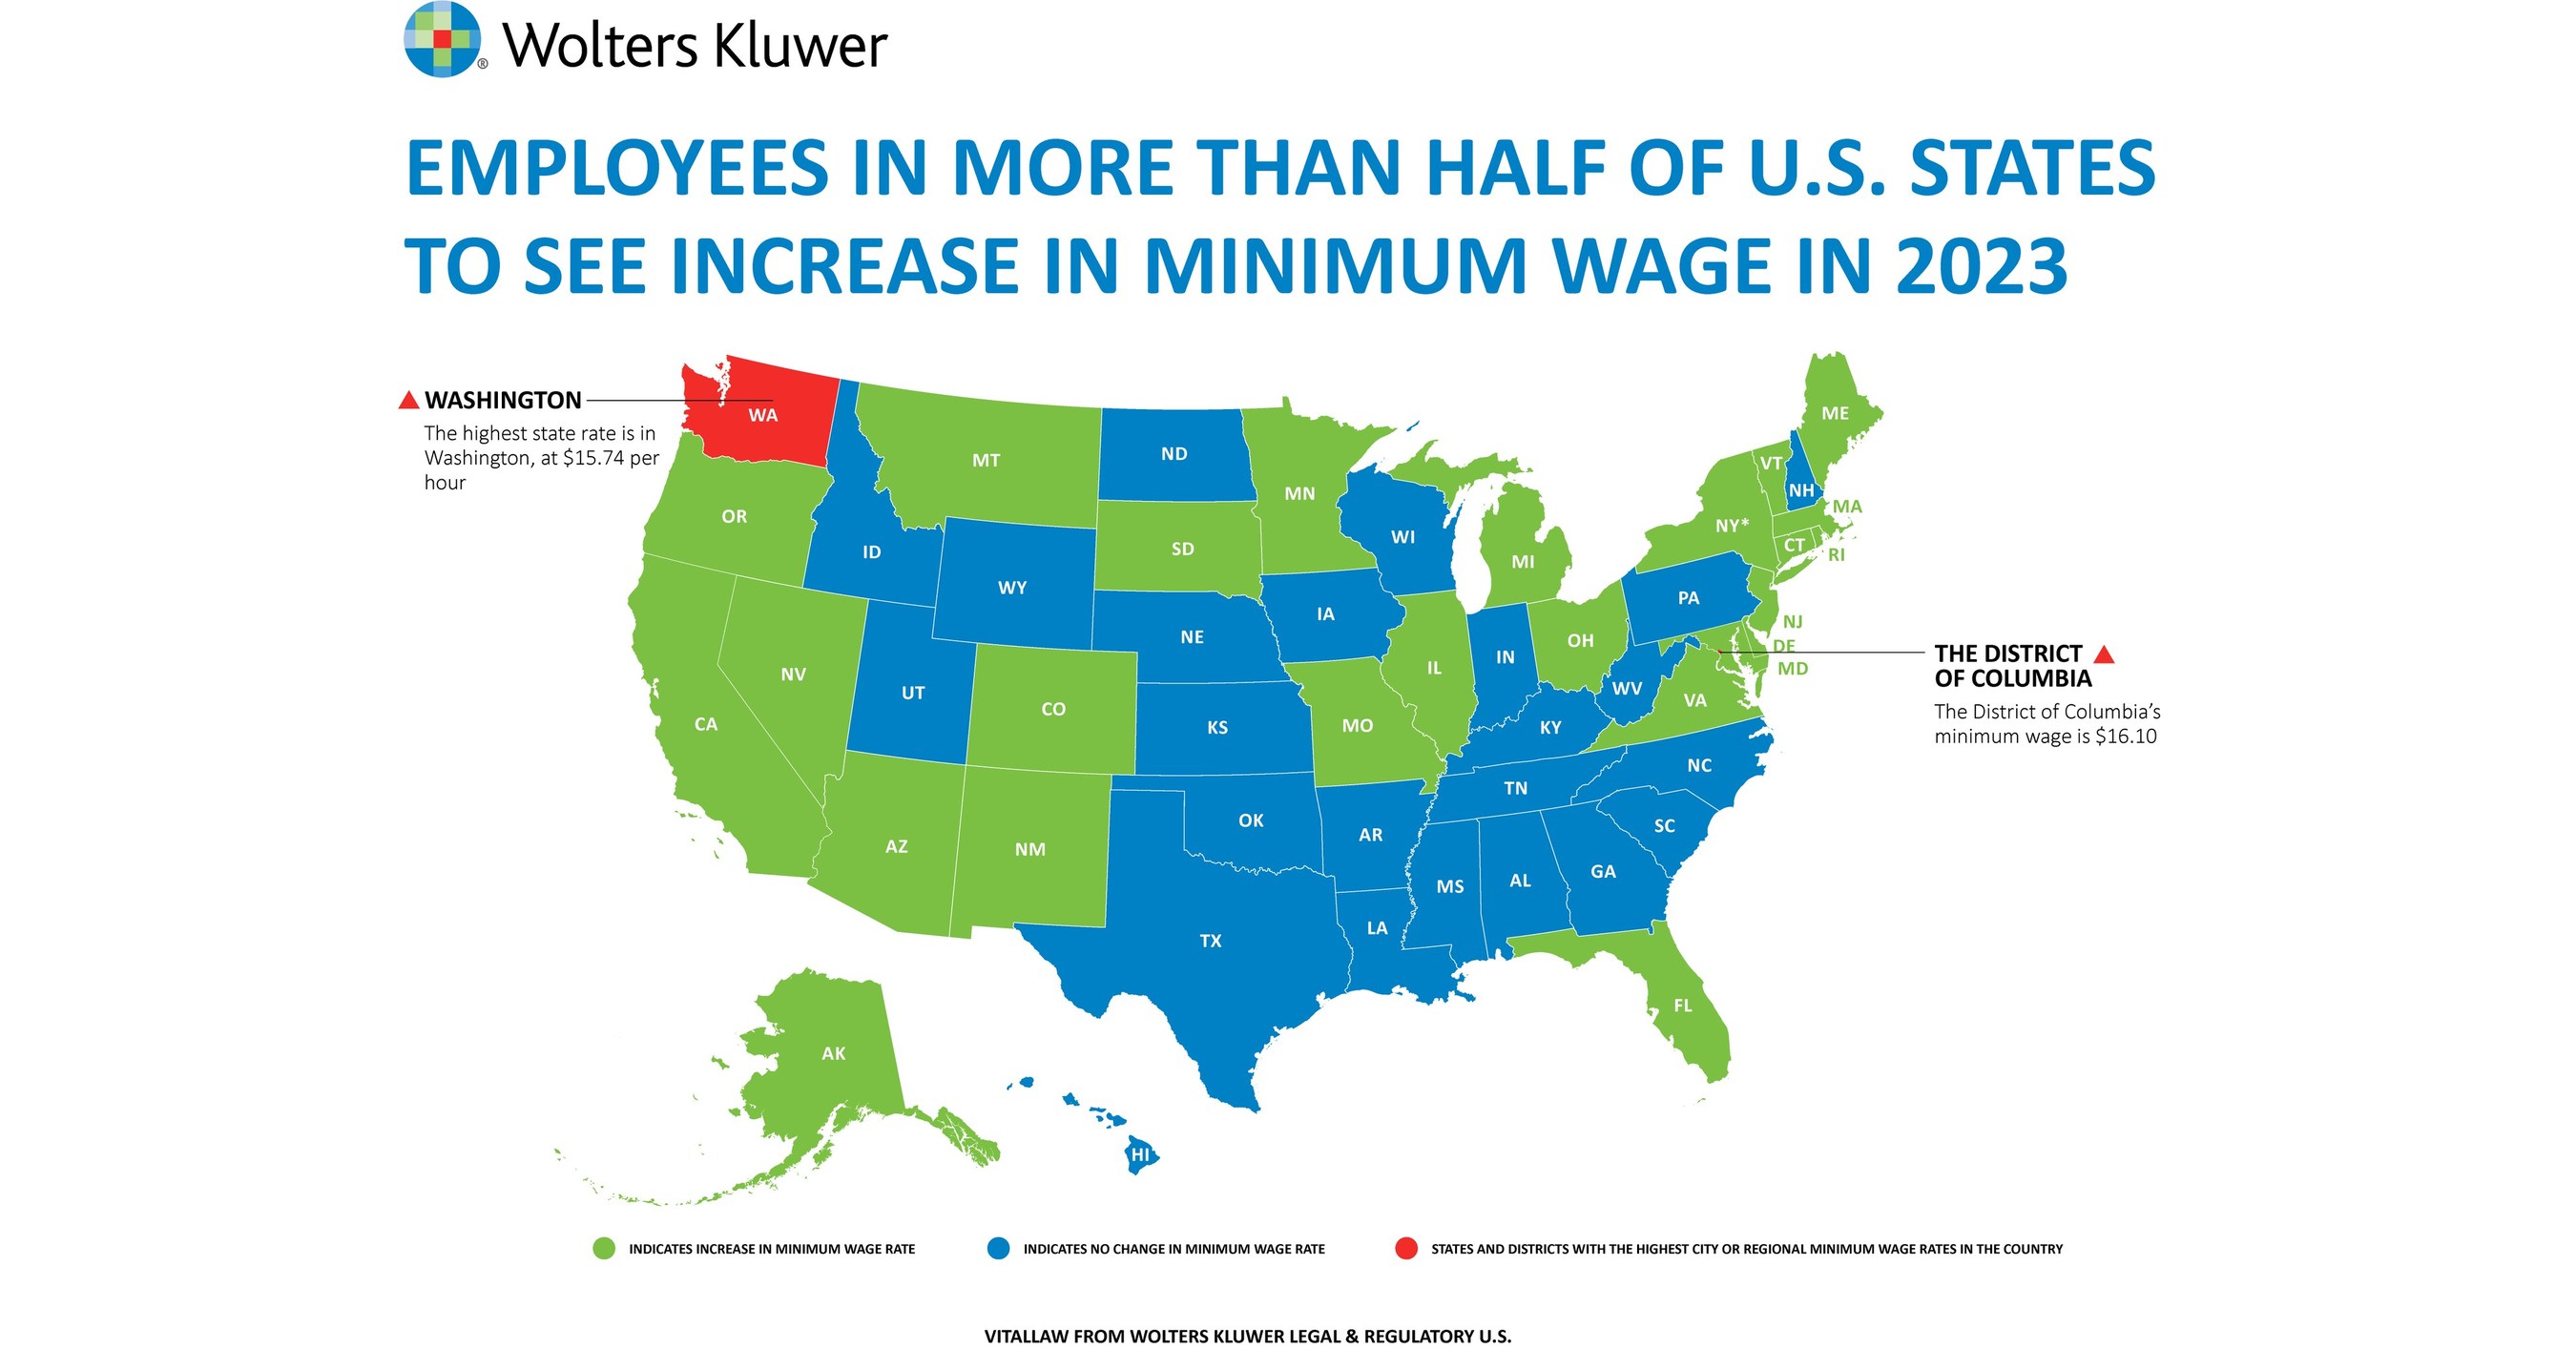 Wolters Kluwer Analysis More than Half of U.S. States to Increase